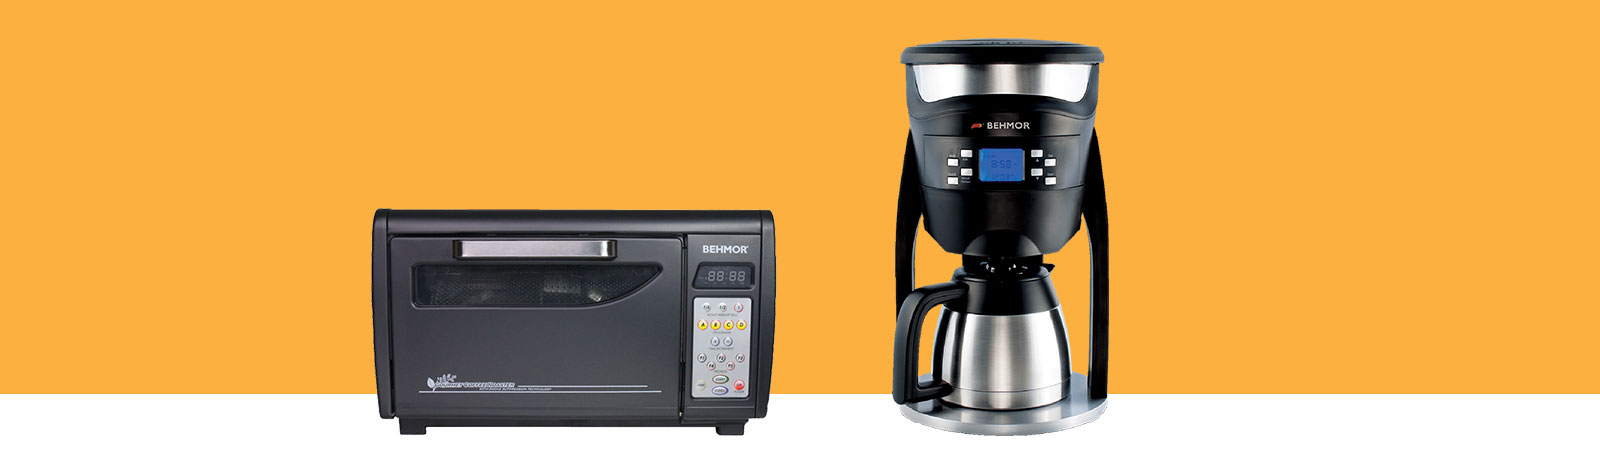 Behmor Connected Coffee Maker